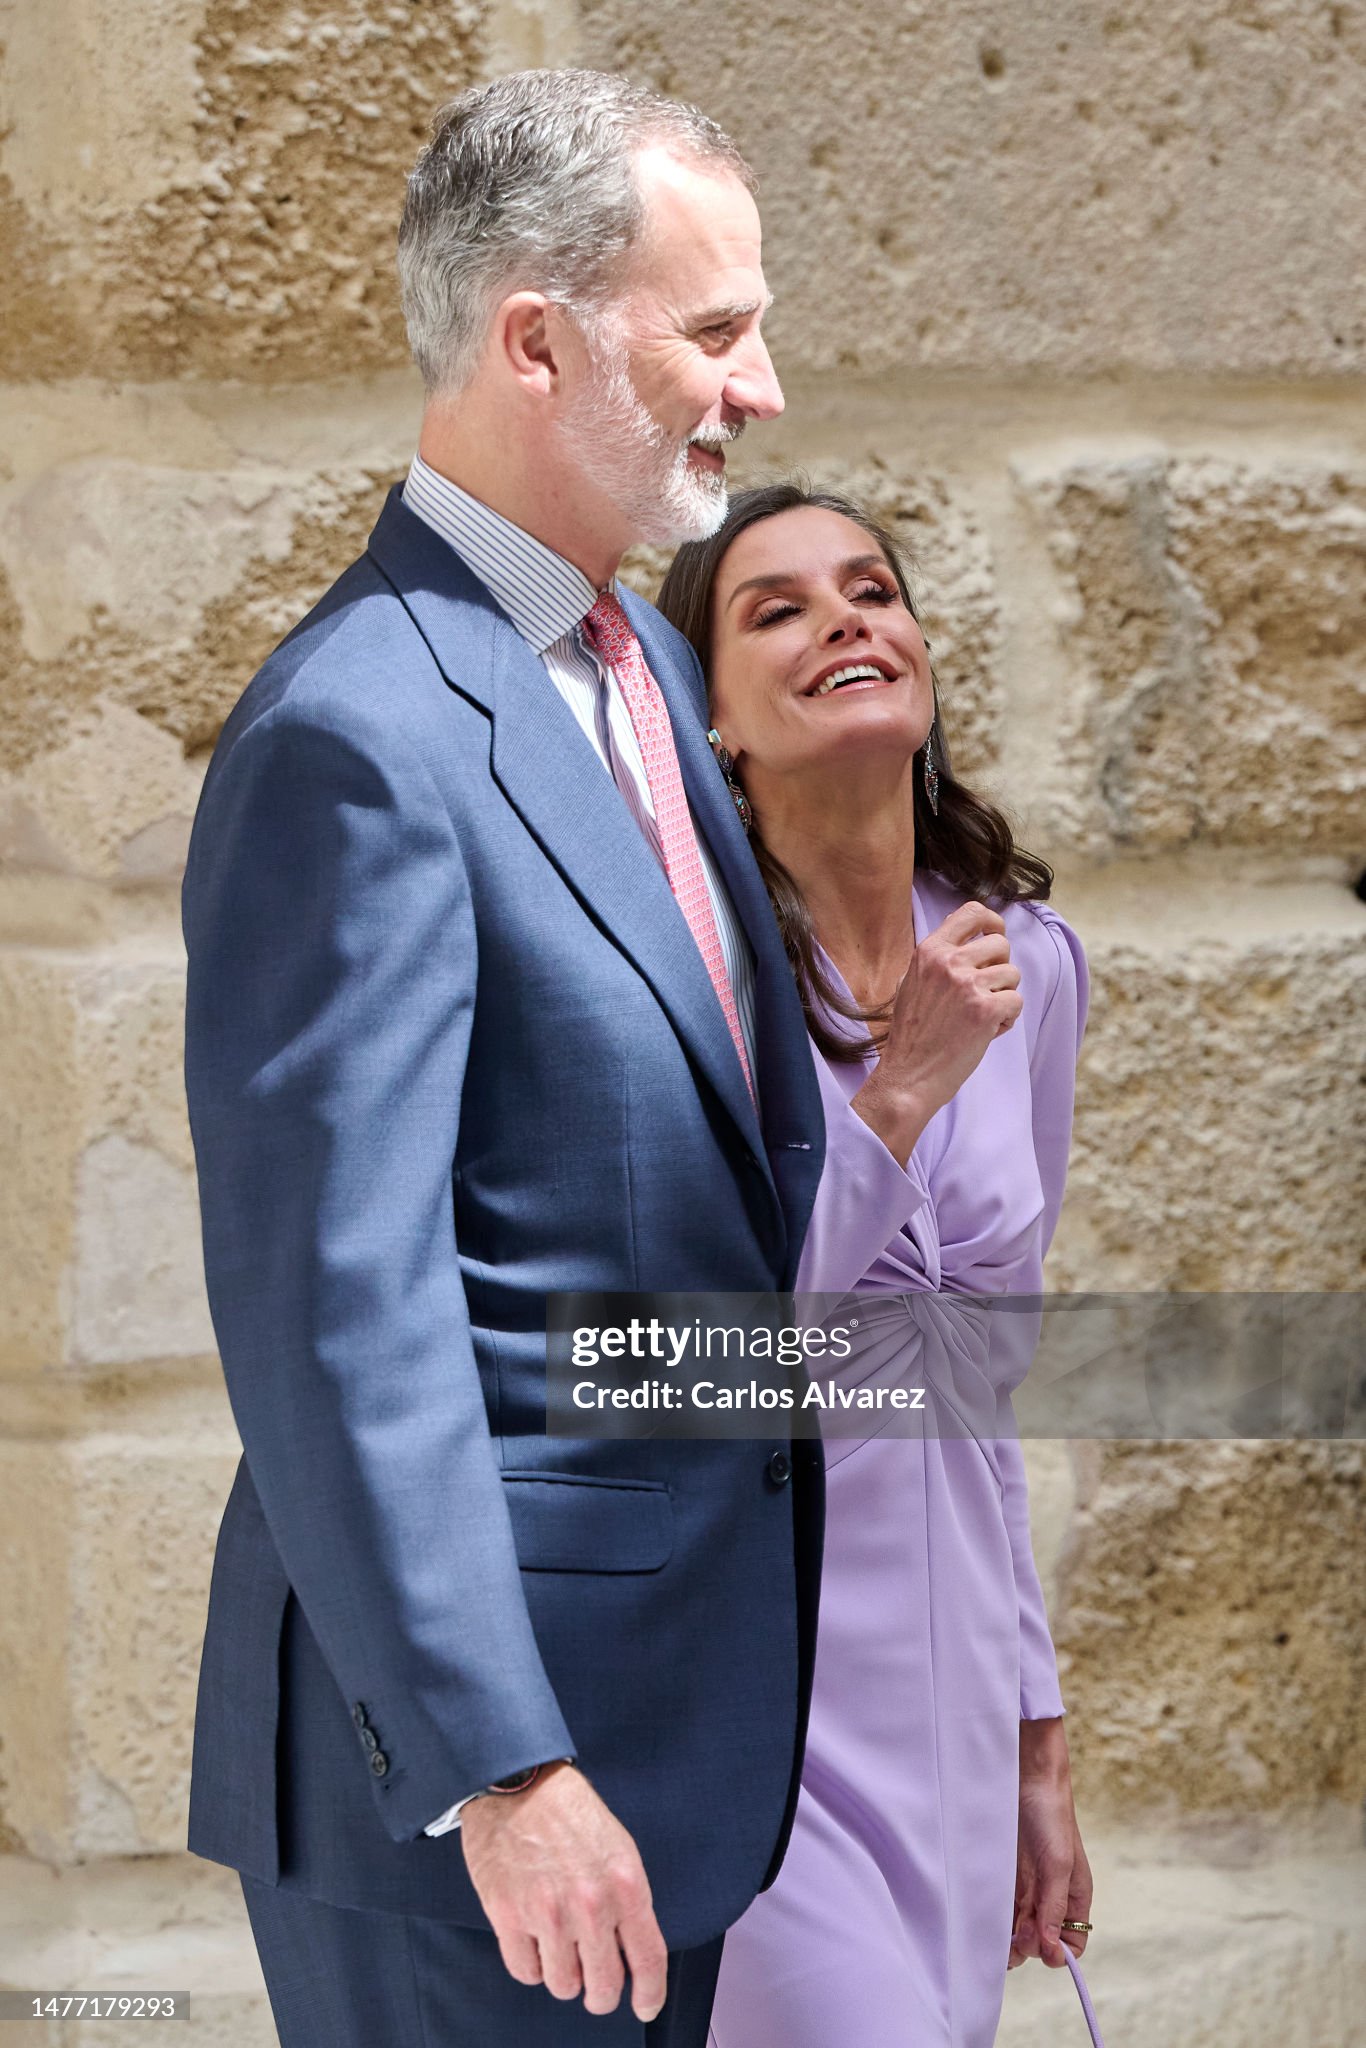 king-felipe-vi-of-spain-and-queen-letizia-of-spain-visit-the-exhibitions-on-the-occasion-of.jpg